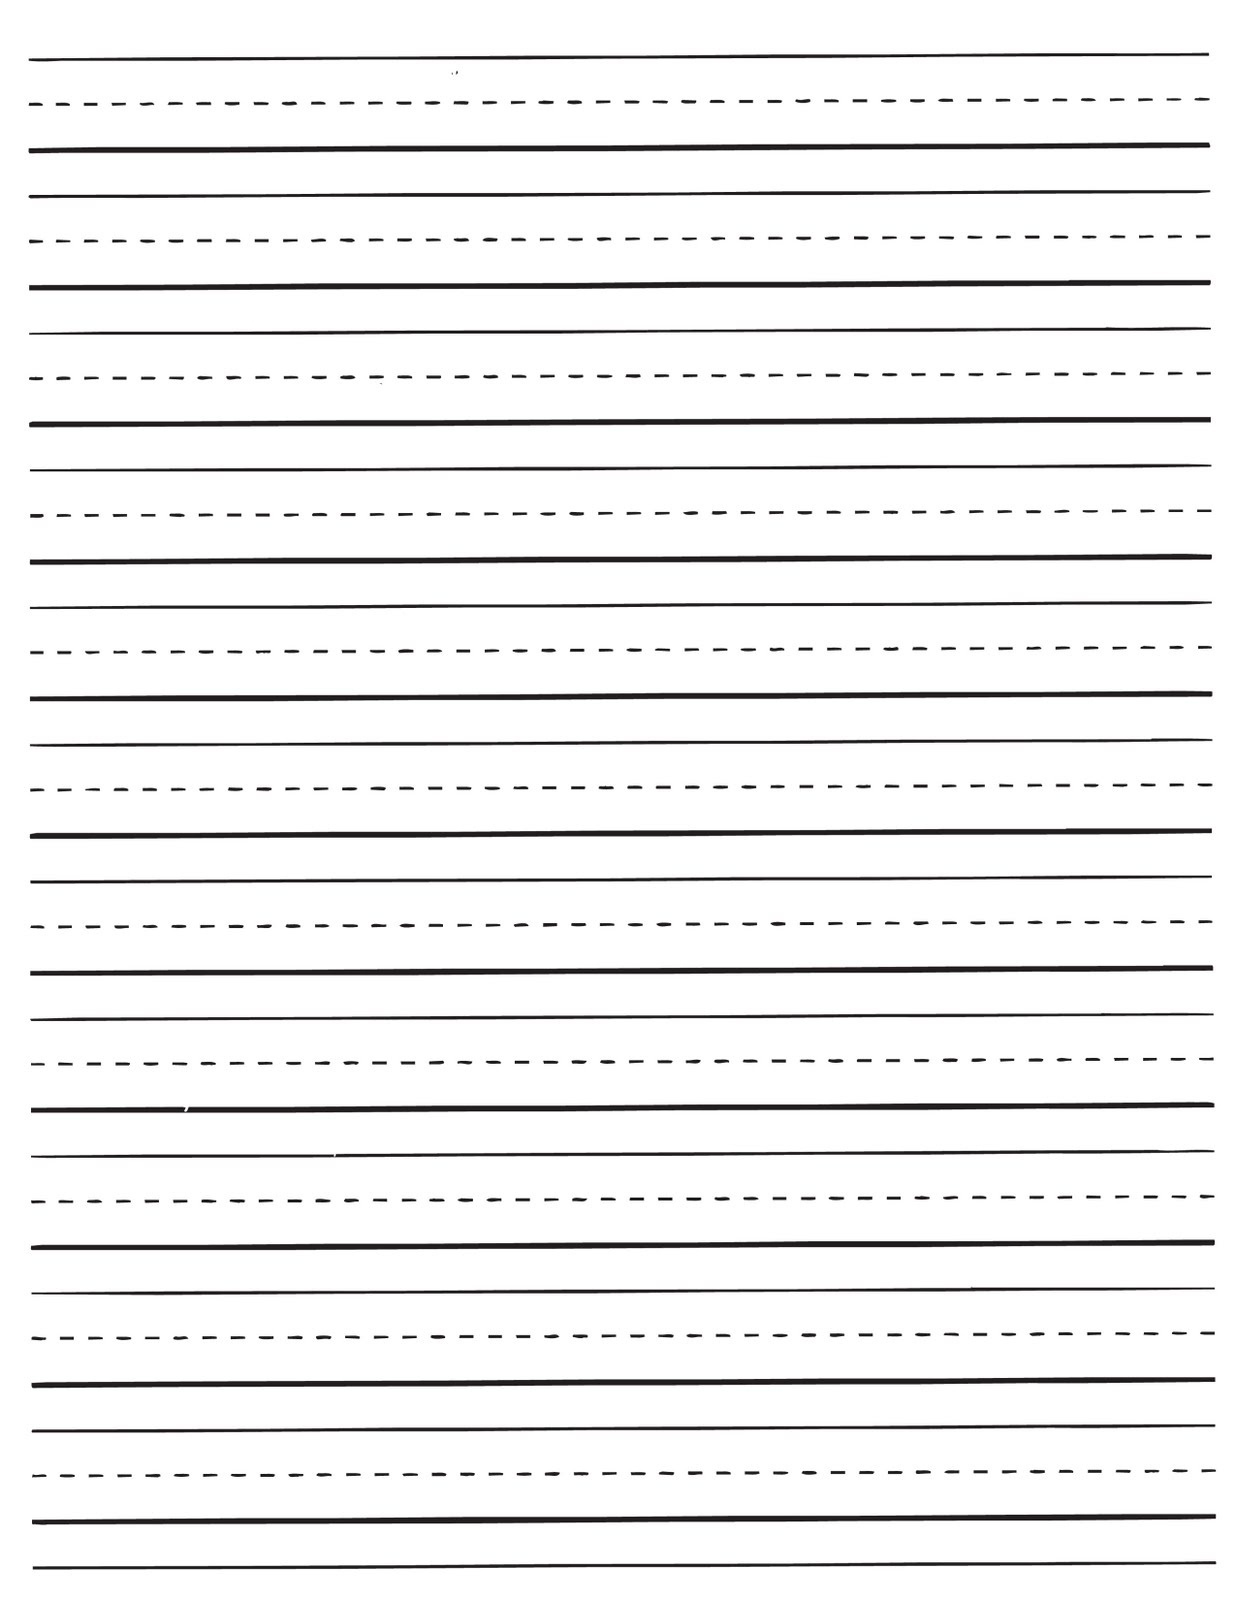 Printable Lined Paper For Kids | World Of Label - Free Printable Lined Handwriting Paper